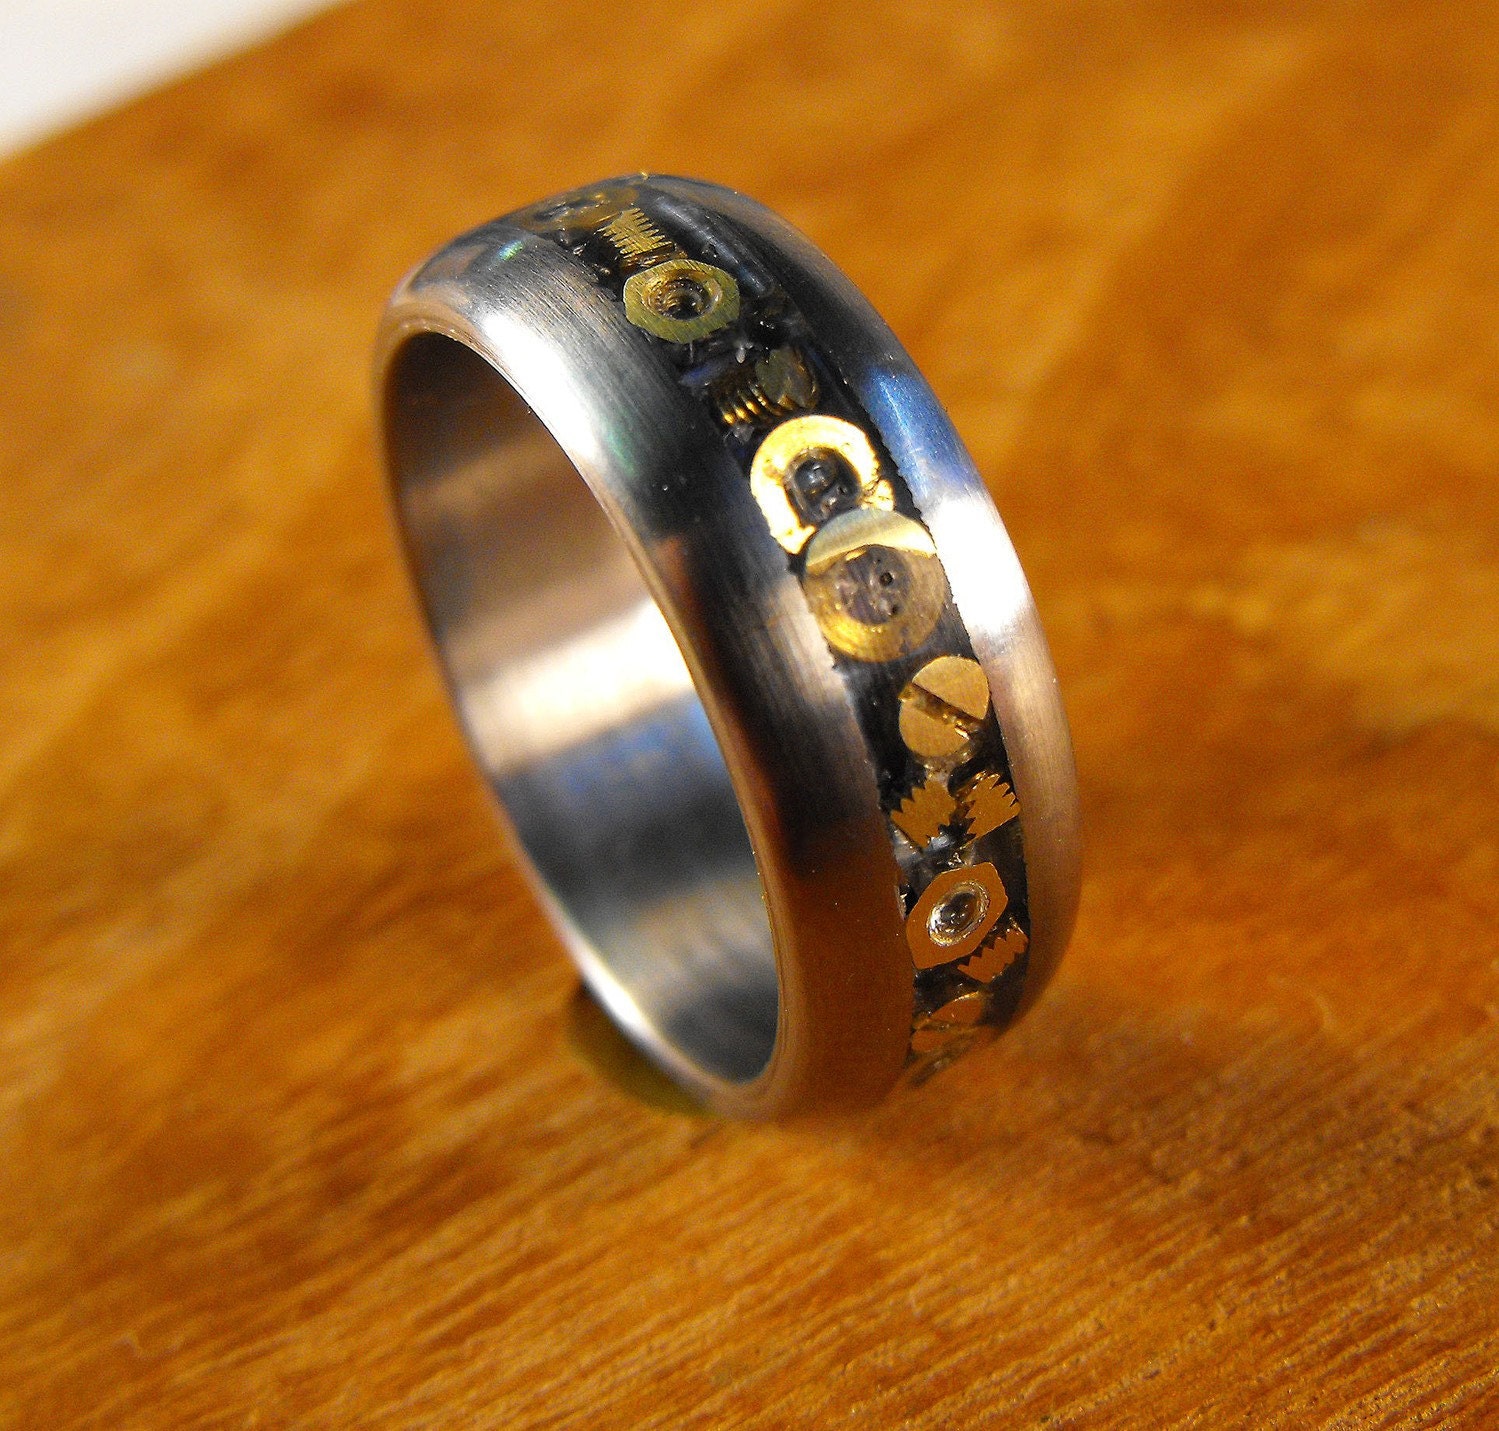 Bolt and nut wedding rings